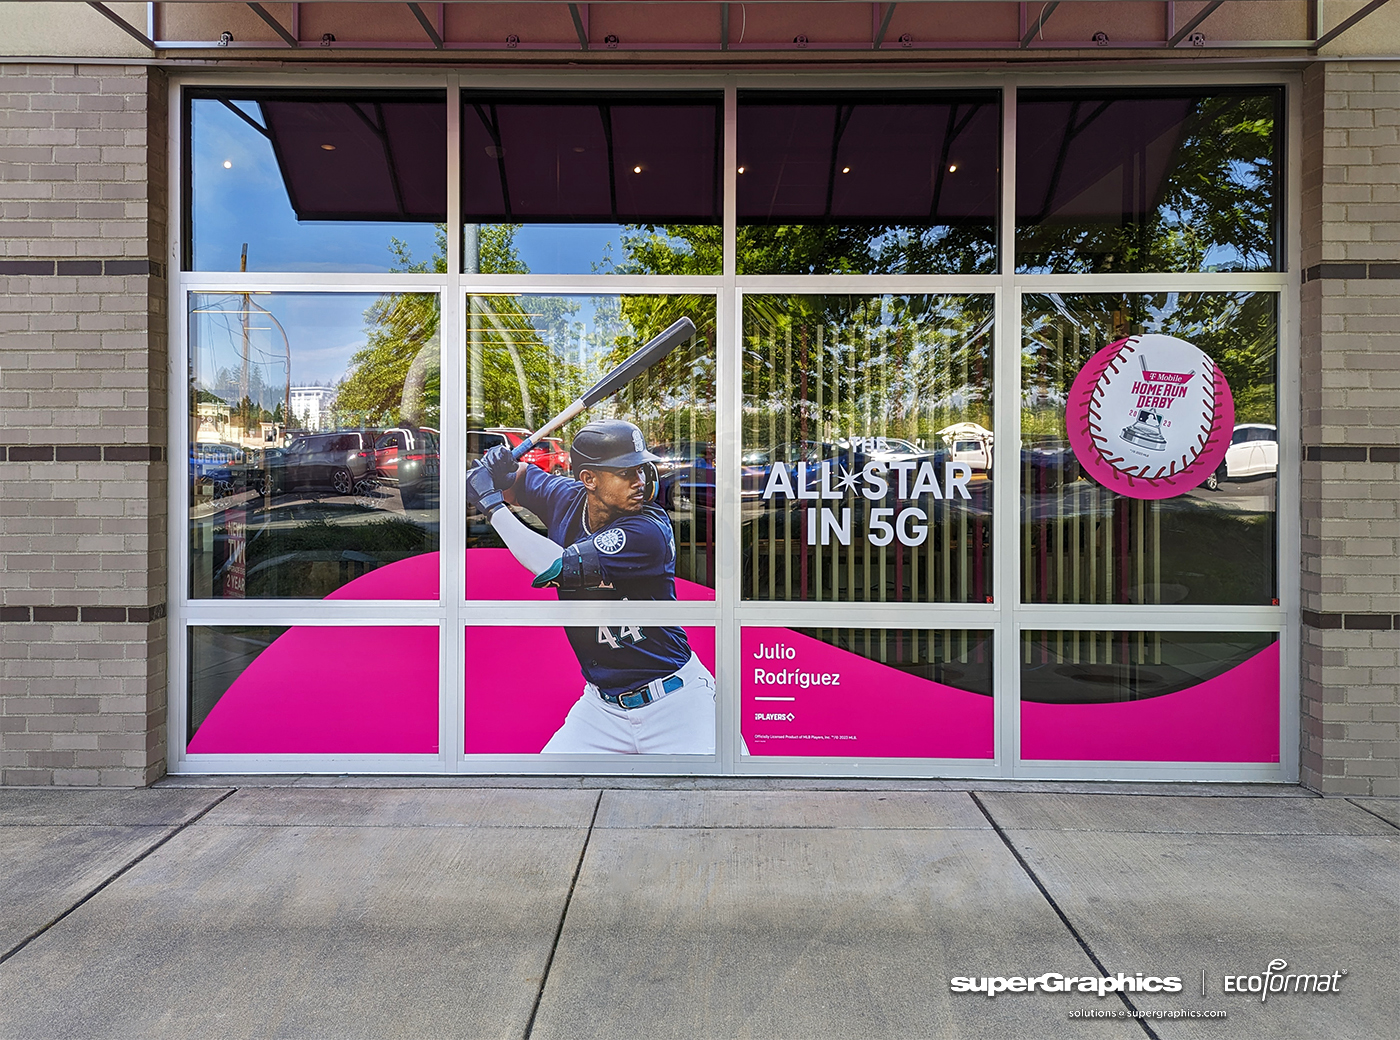 T-Mobile store windows from a side angle, featuring promotional graphics for 'ALLSTAR in 5G' with the image of Julio Rodriguez, a baseball icon, against a vivid pink backdrop.